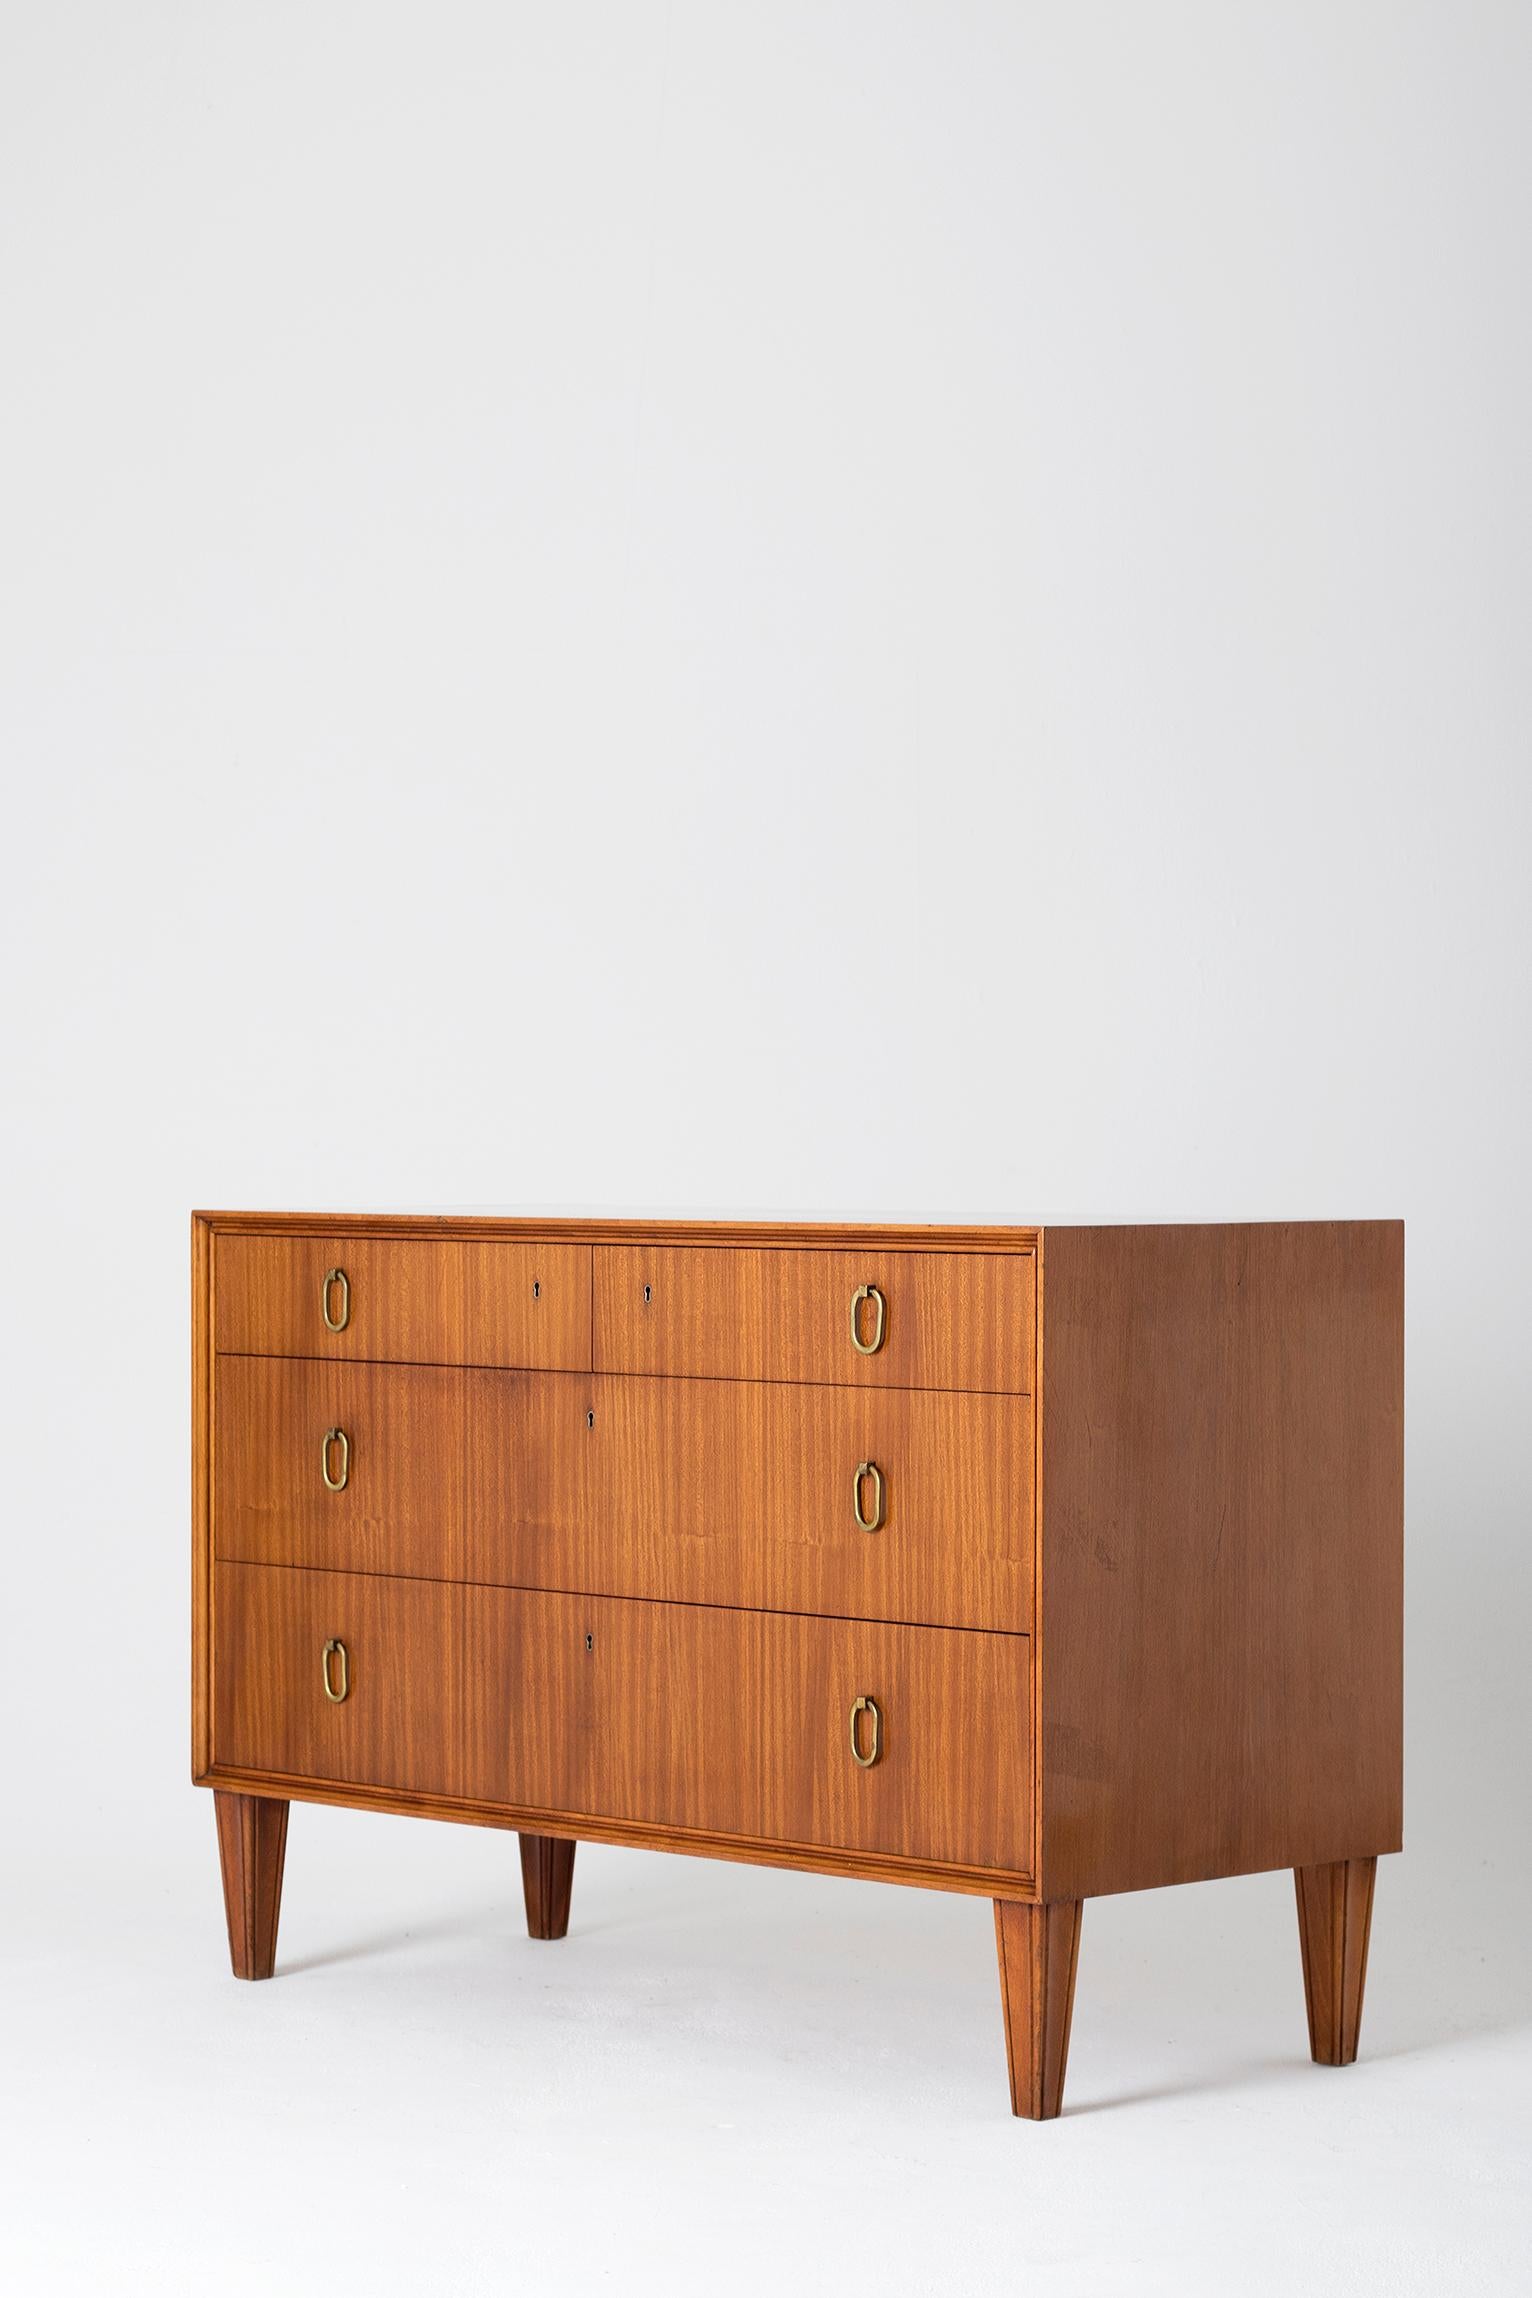 Swedish Midcentury Mahogany Chest of Drawers by Axel Larsson for Bodafors